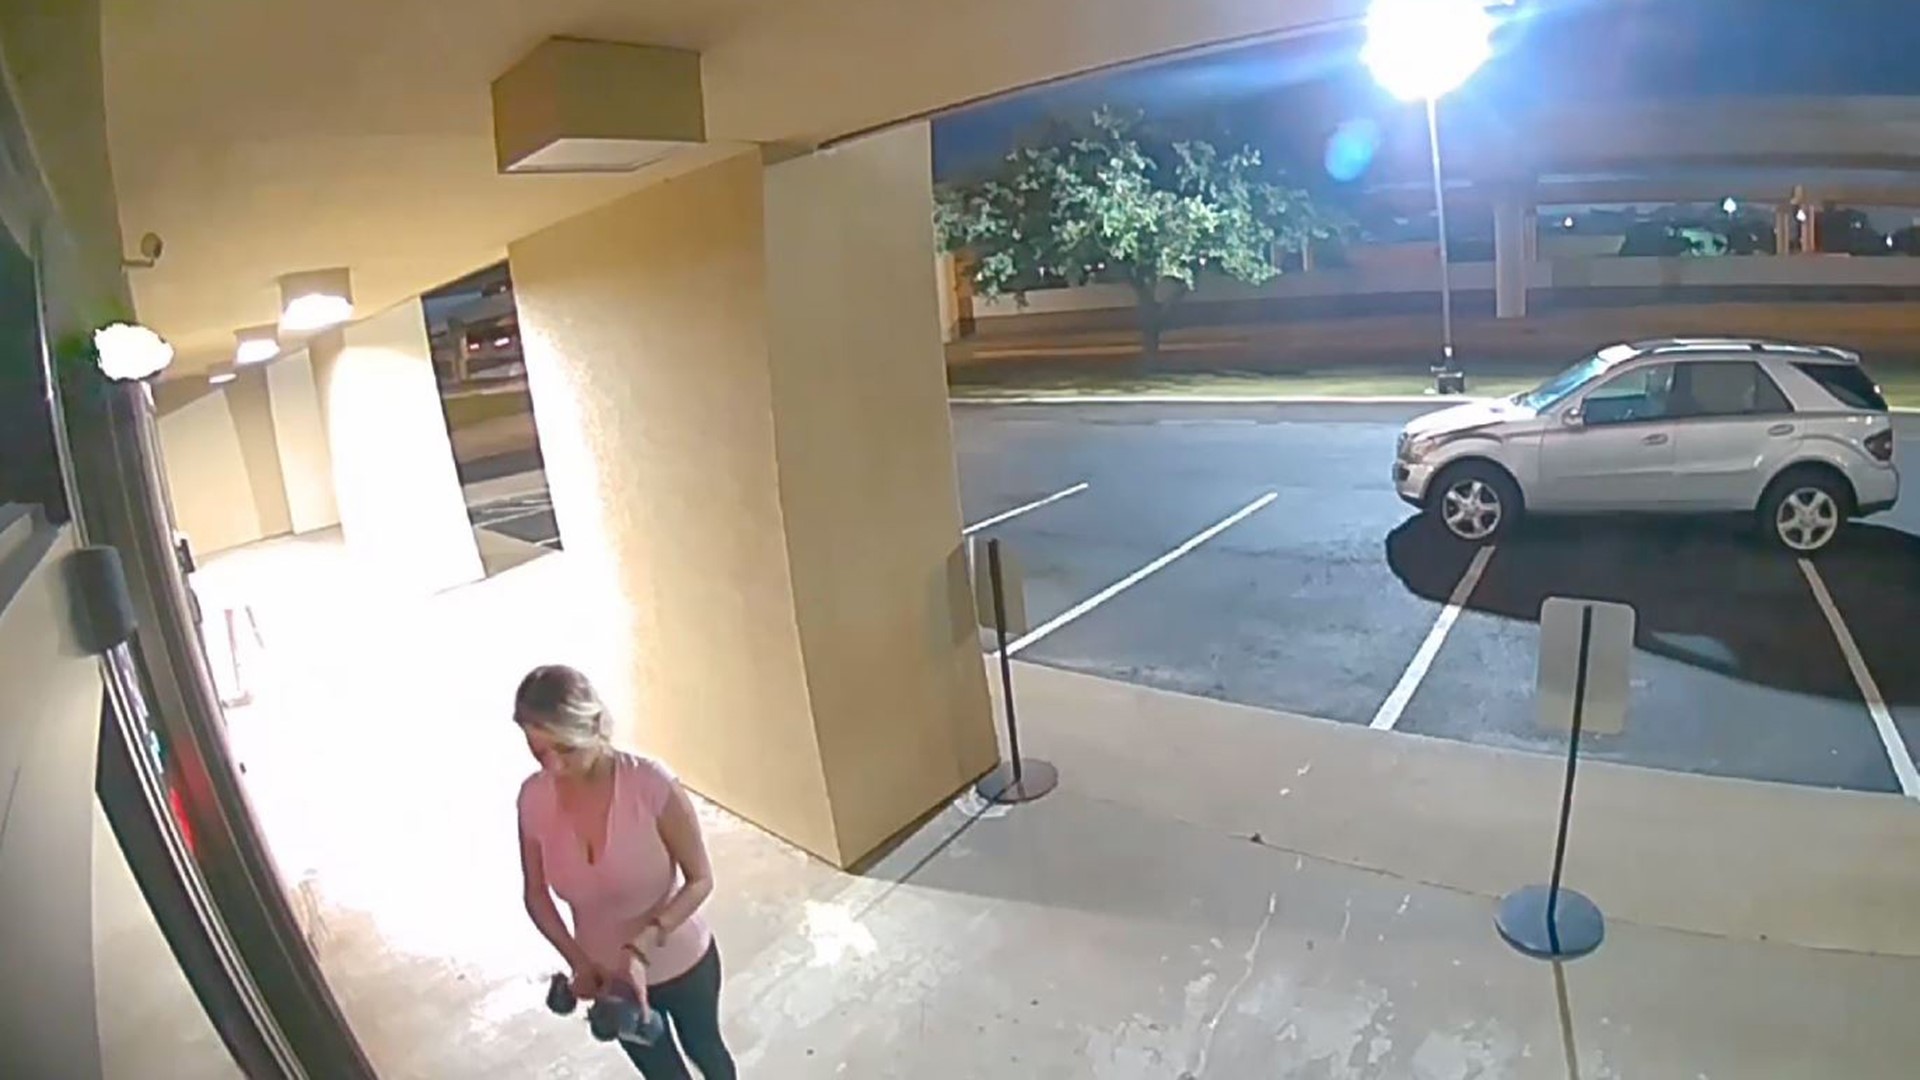 Sugar Land police are looking for a woman who, they say, used a battery-powered grinding saw to break into a spa and steal Botox.

She appears to be trying to pry the door open with her hands before retrieving the power tool from her Mercedes SUV.